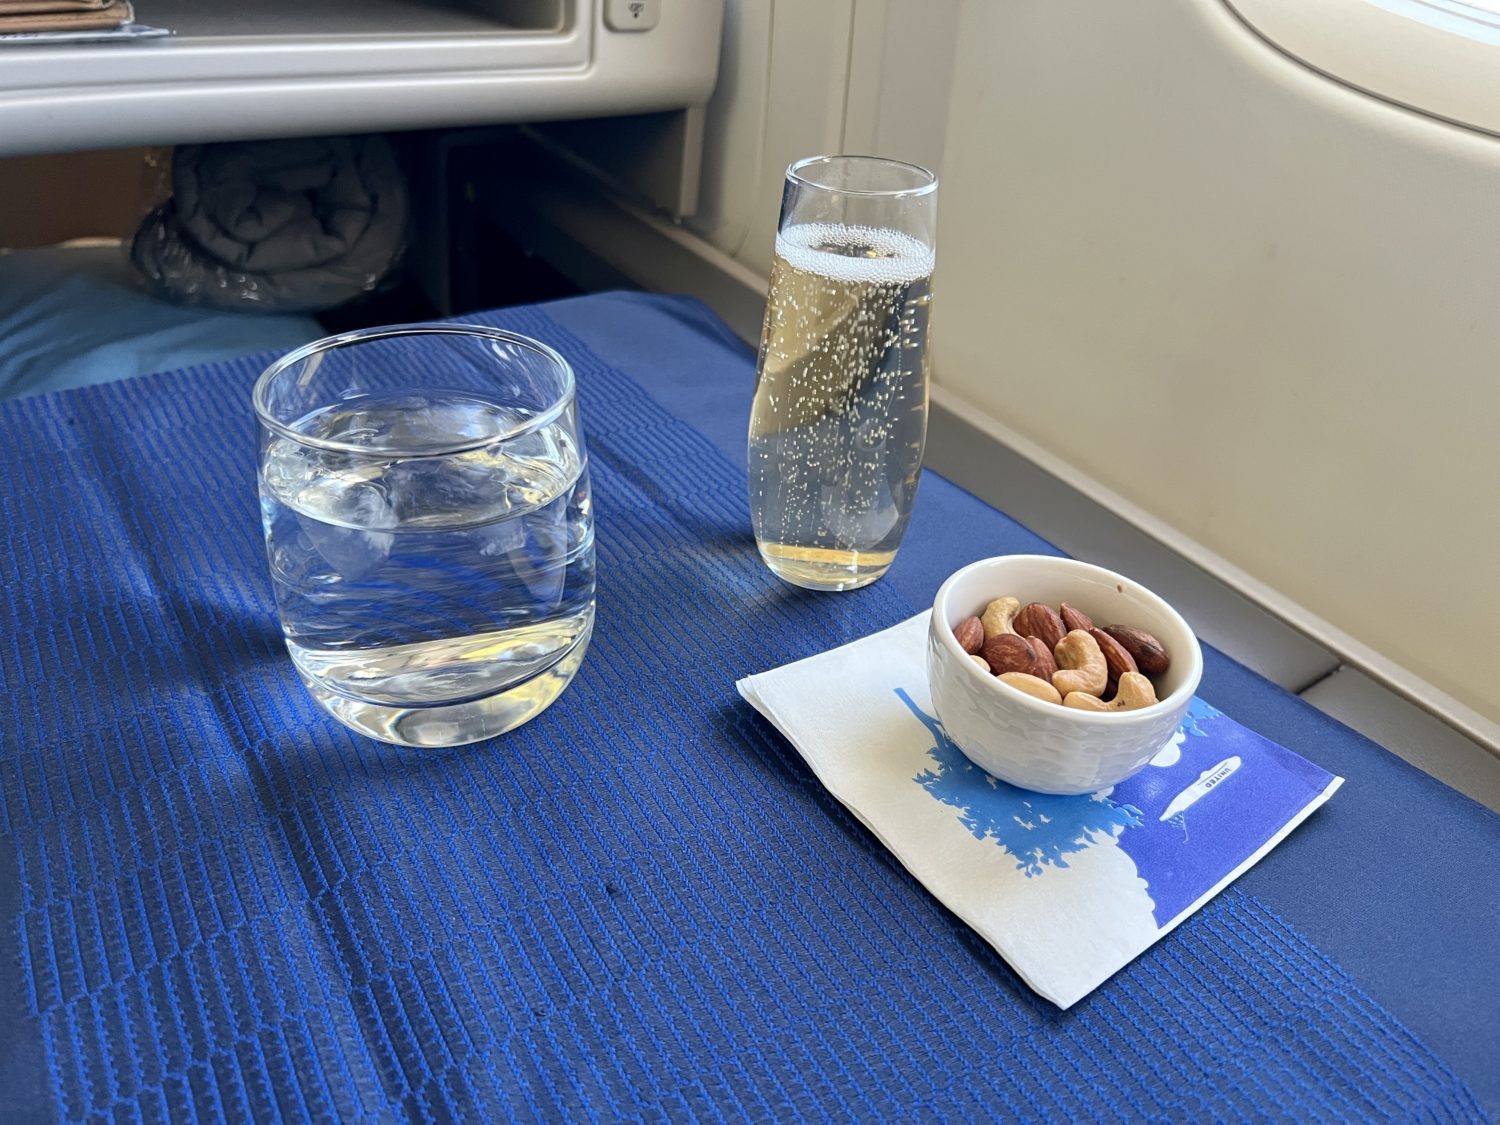 united polaris drinks  United Polaris Business Class Review on the 767-300ER &#8211; Thrifty Traveler united polaris business class pre dinner scaled